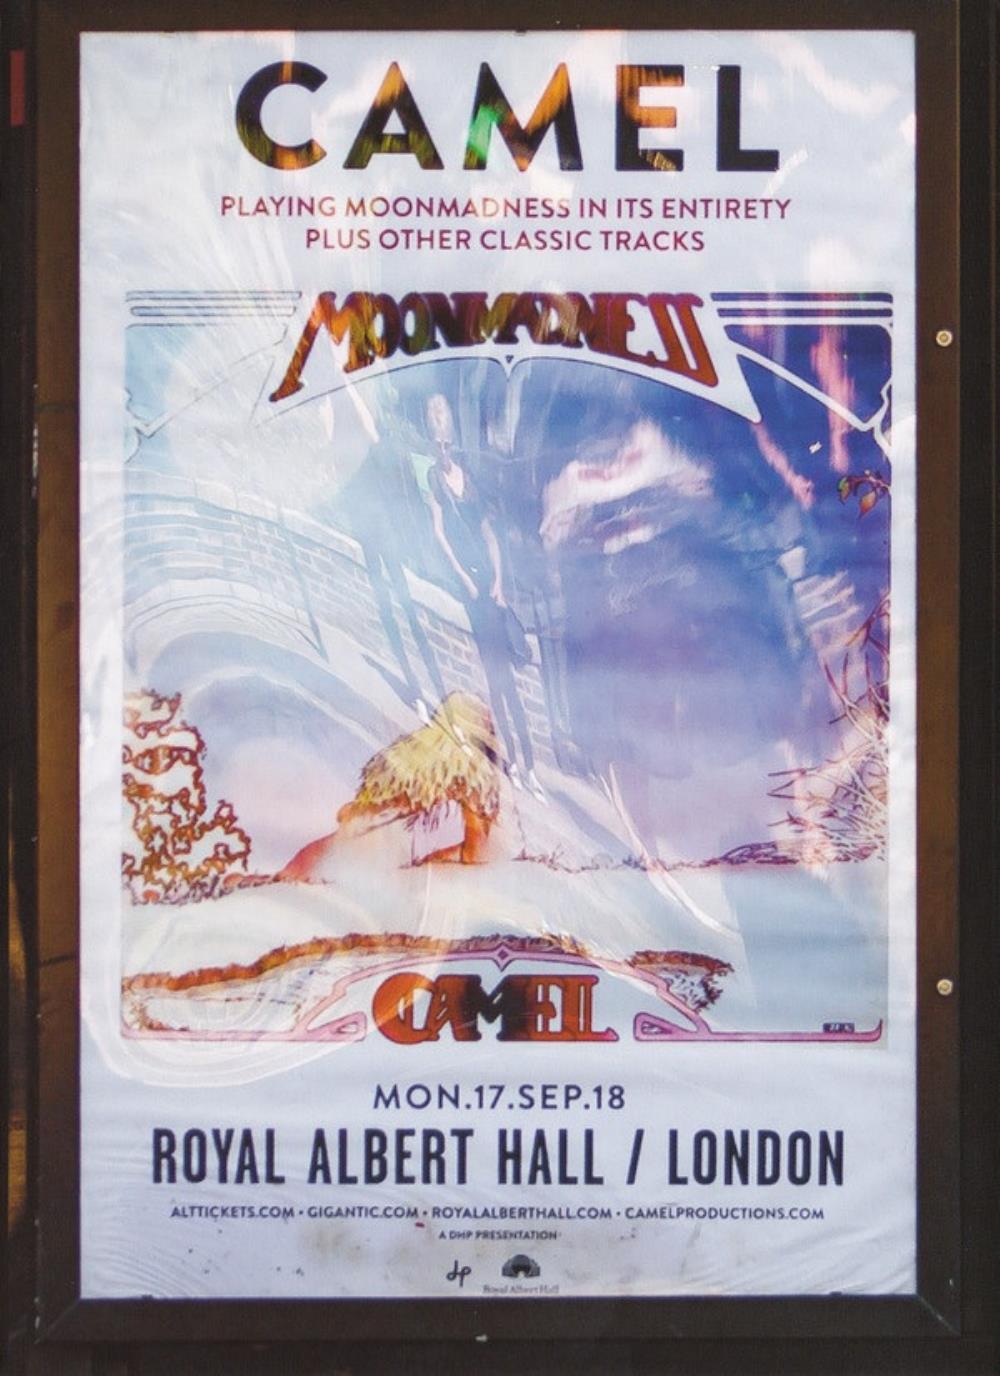 Camel Live At The Royal Albert Hall album cover